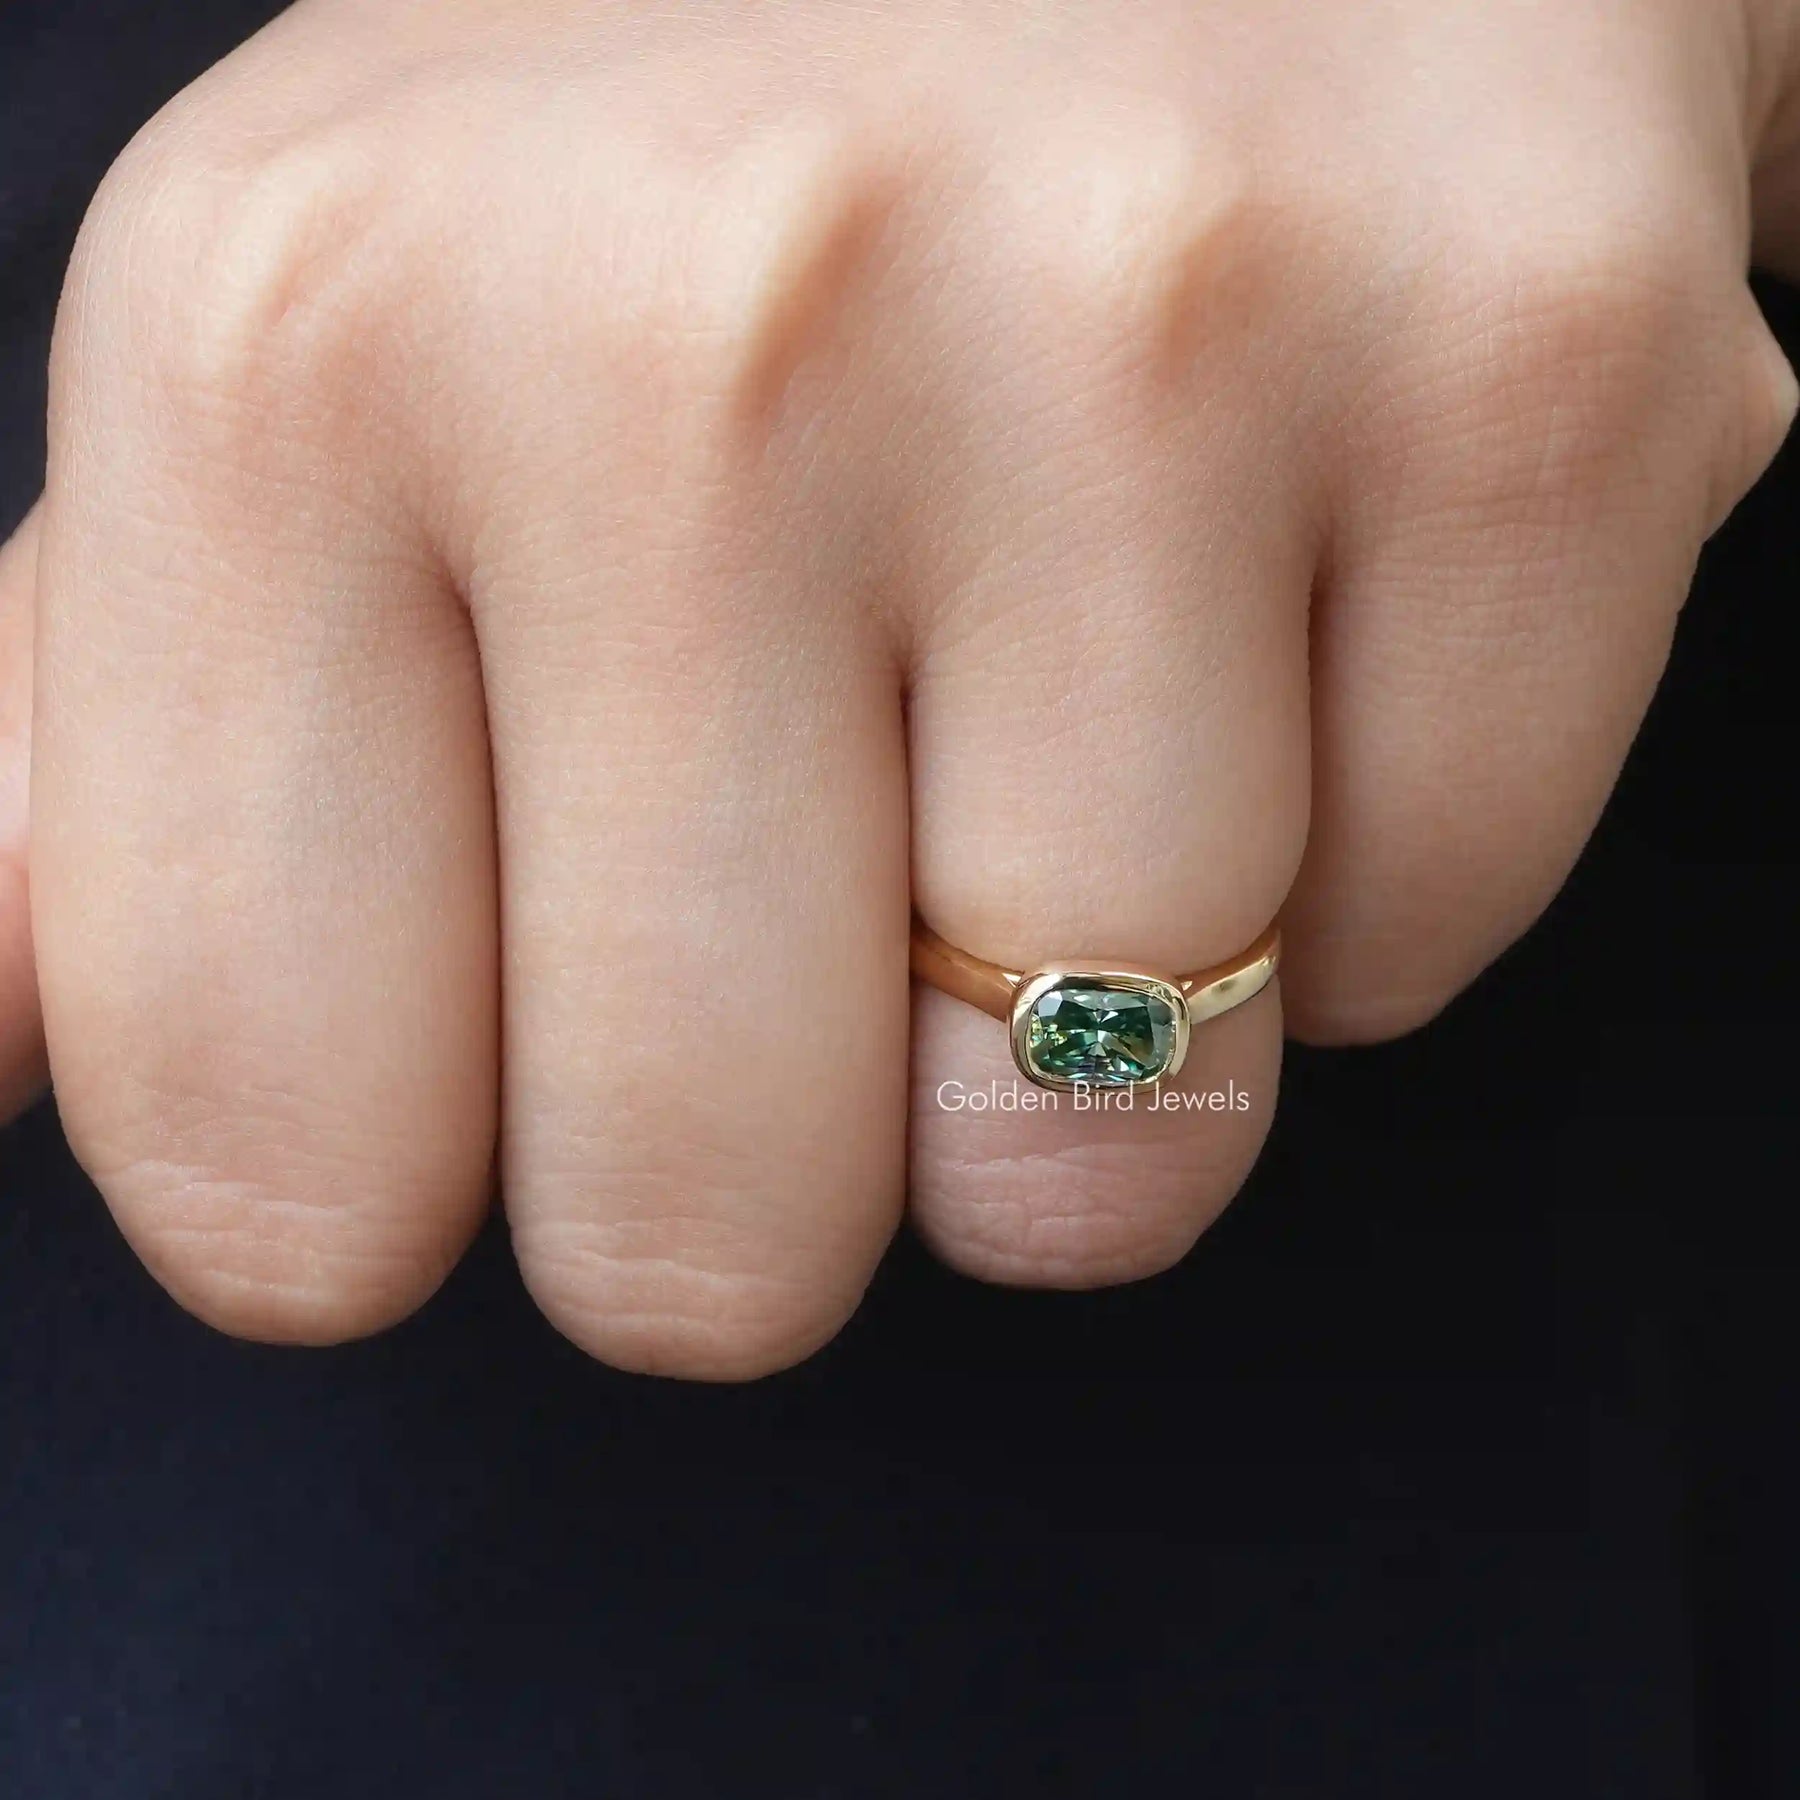 [In Finger a Fancy Colored Moissanite Engagement Ring]-[Golden Bird Jewels] 